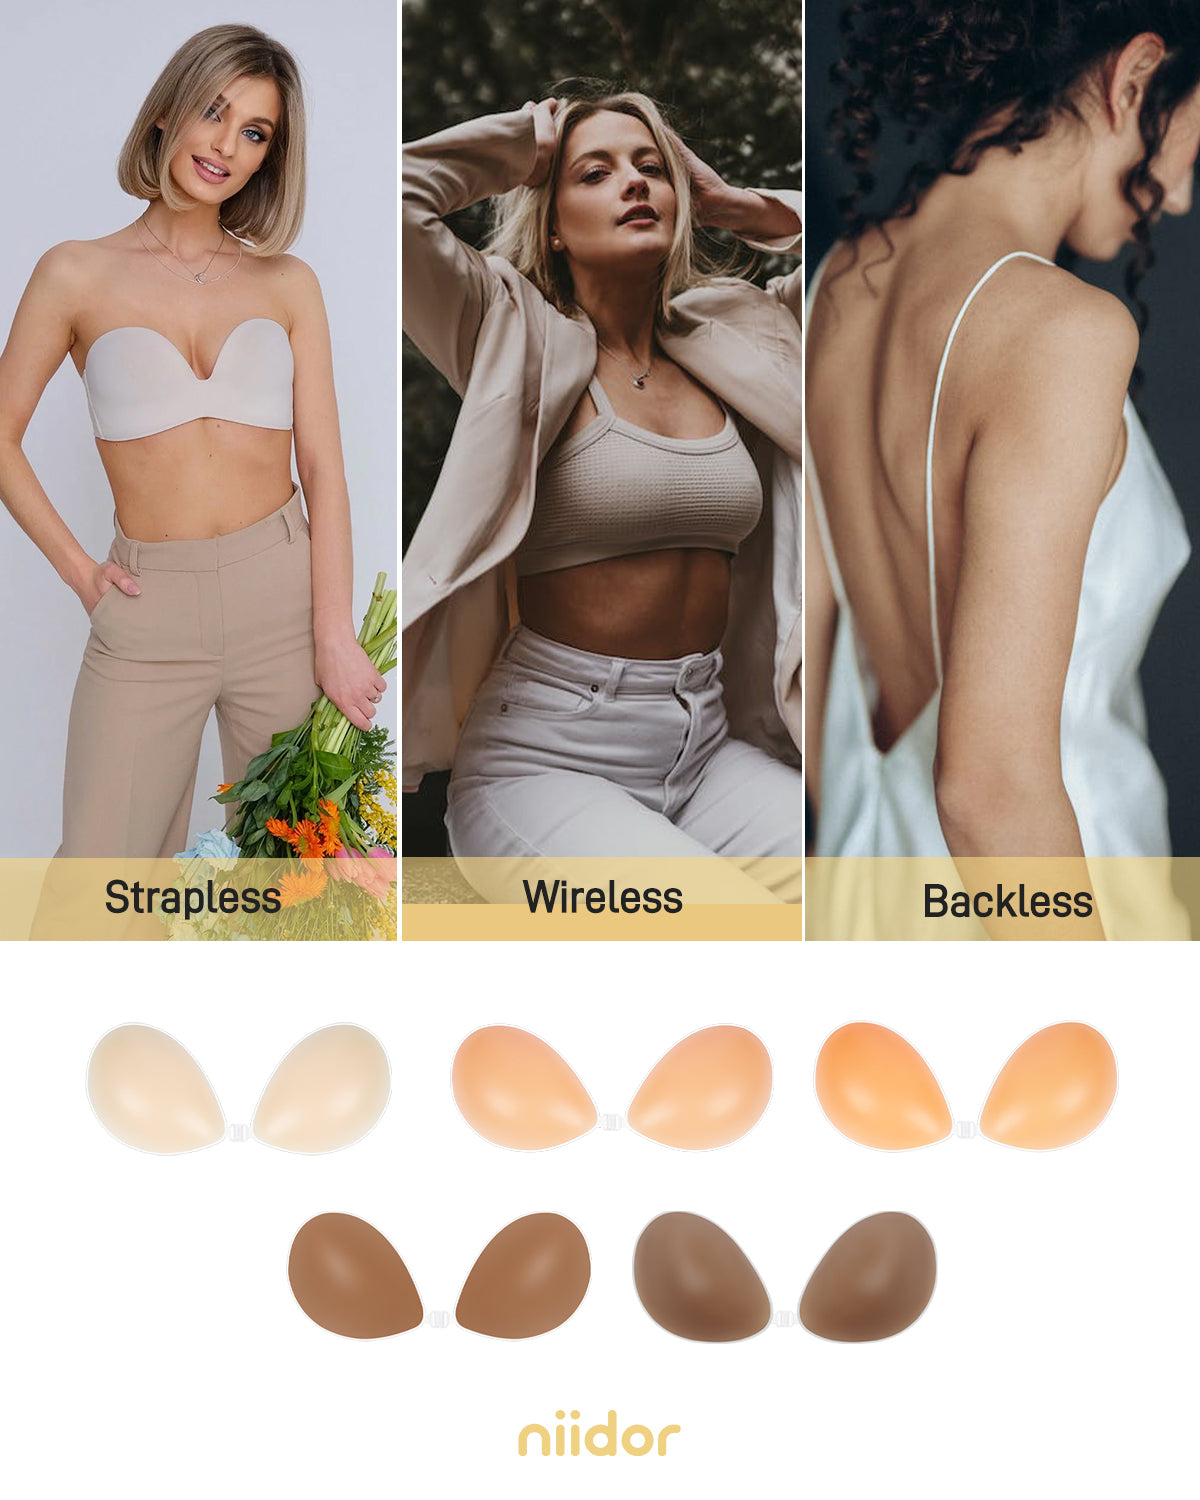 Niidor Adhesive Bra - Strapless Support for Backless Dress